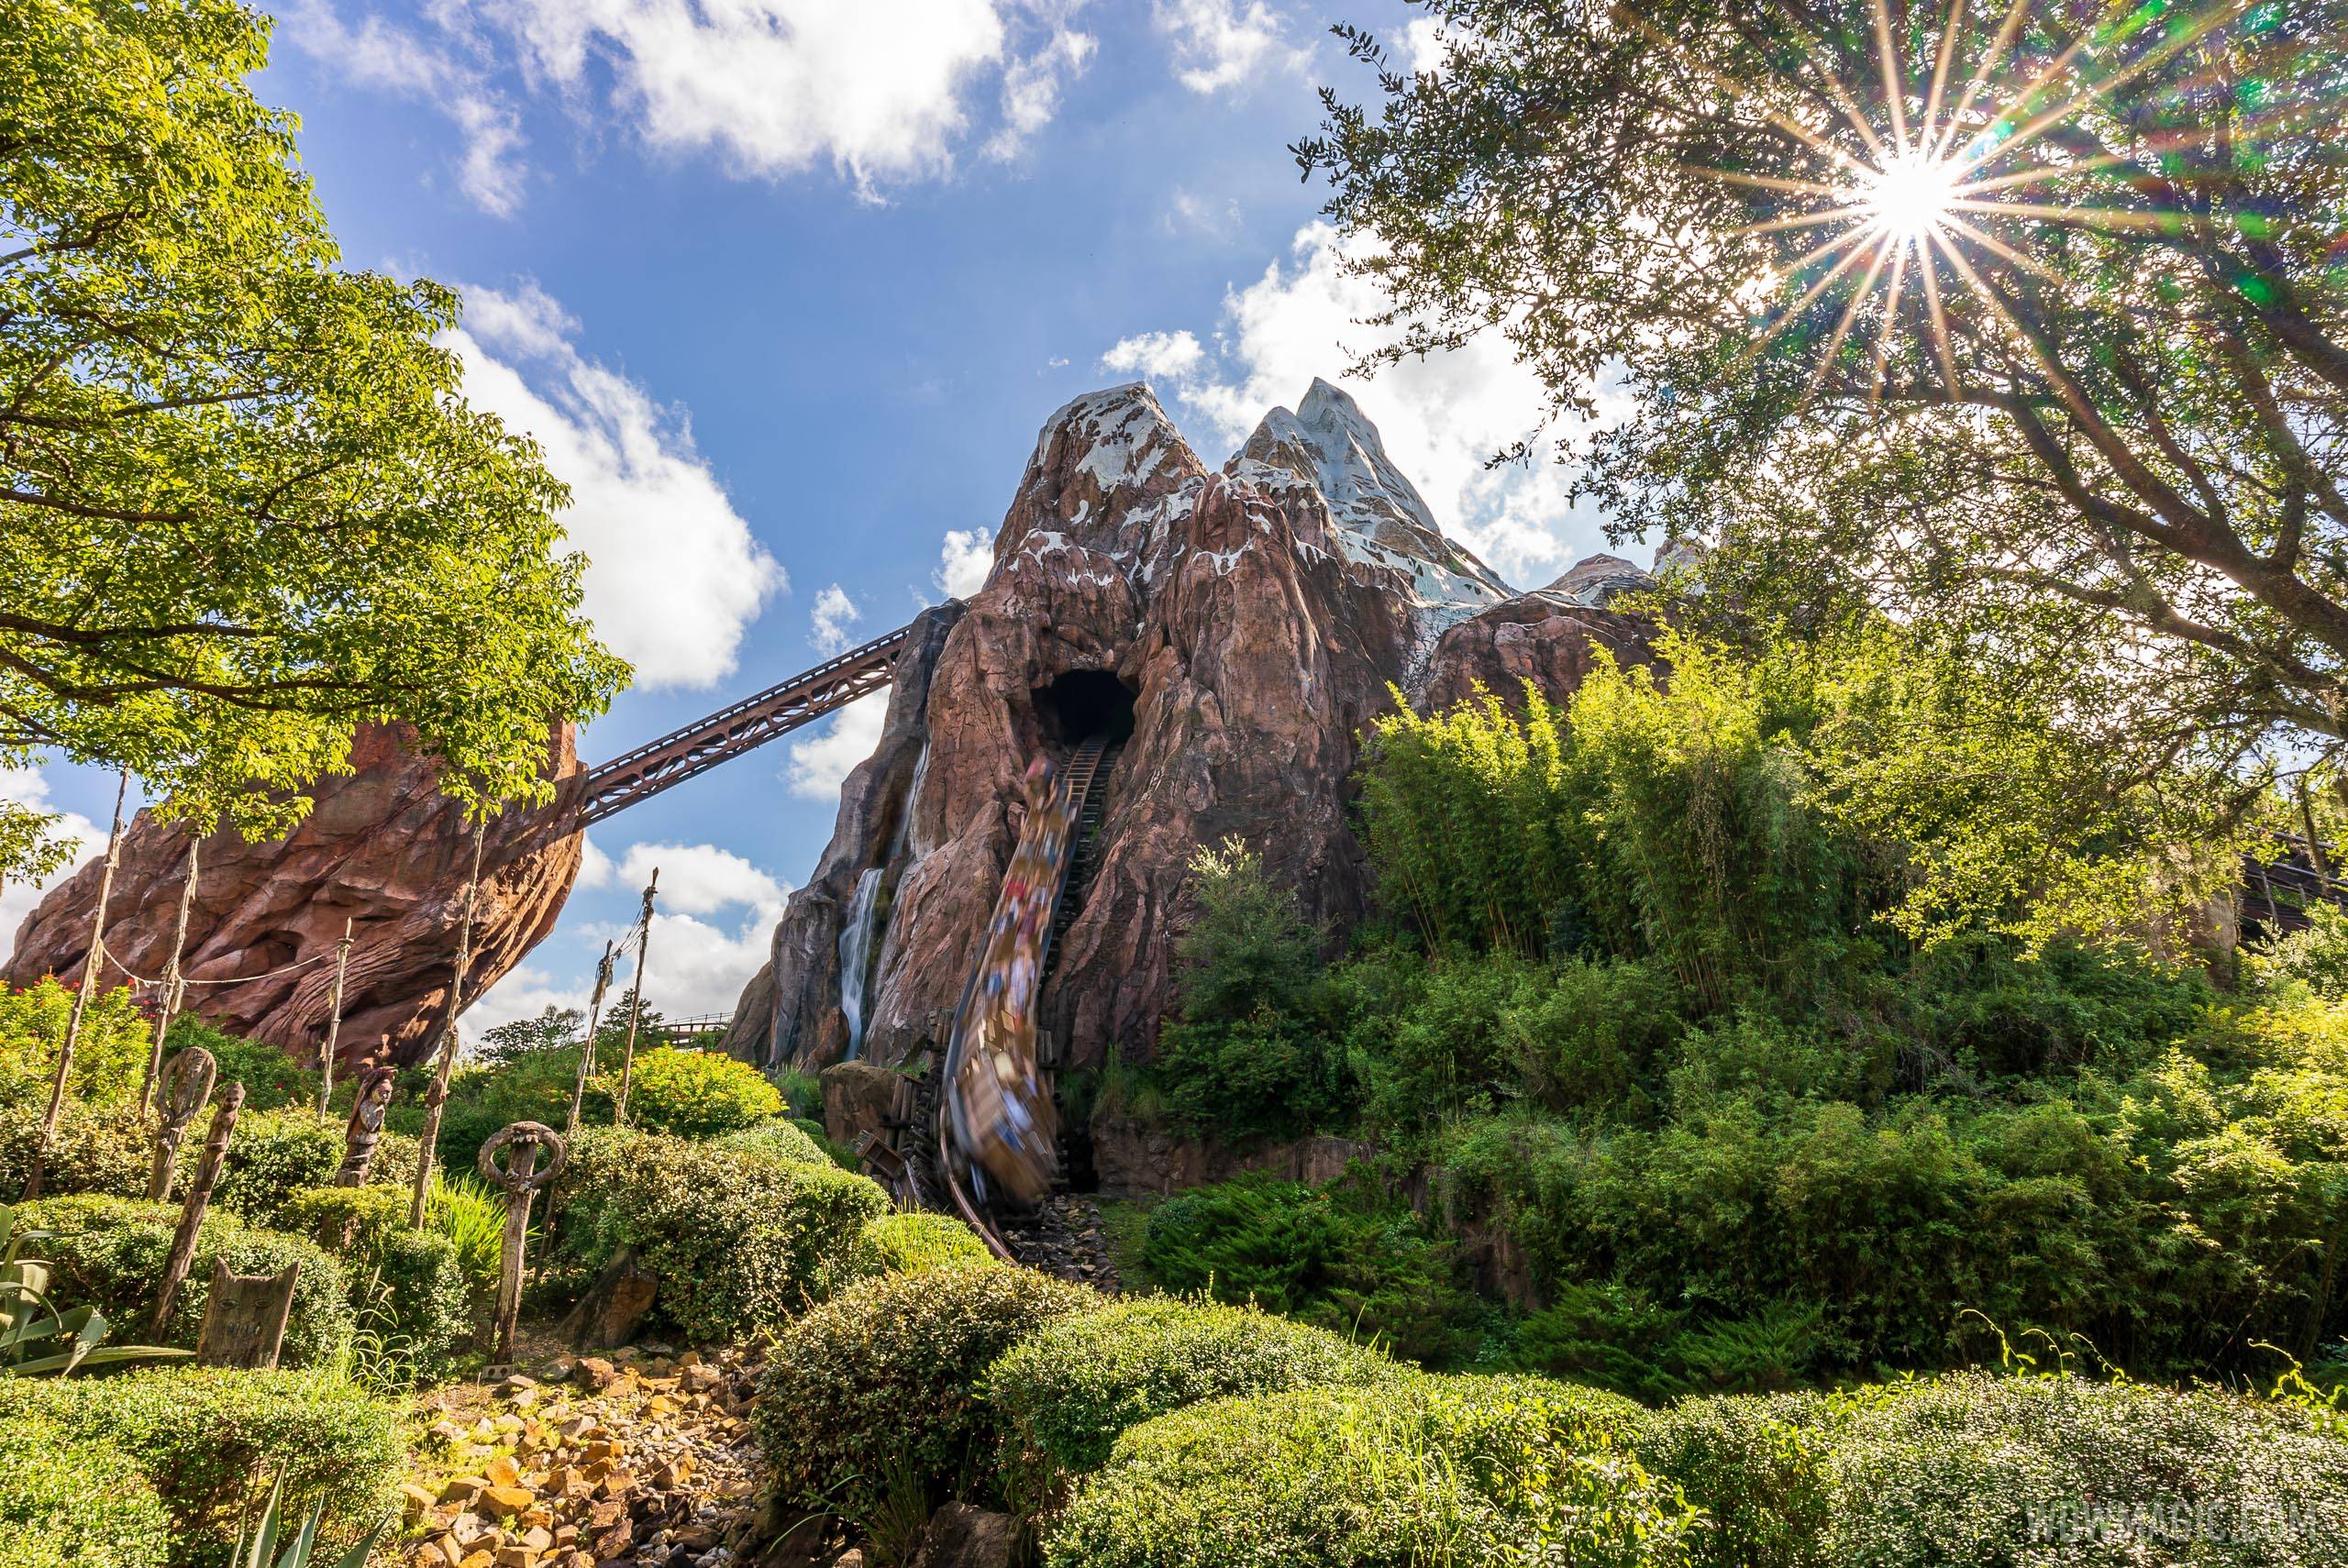 Expedition Everest overview